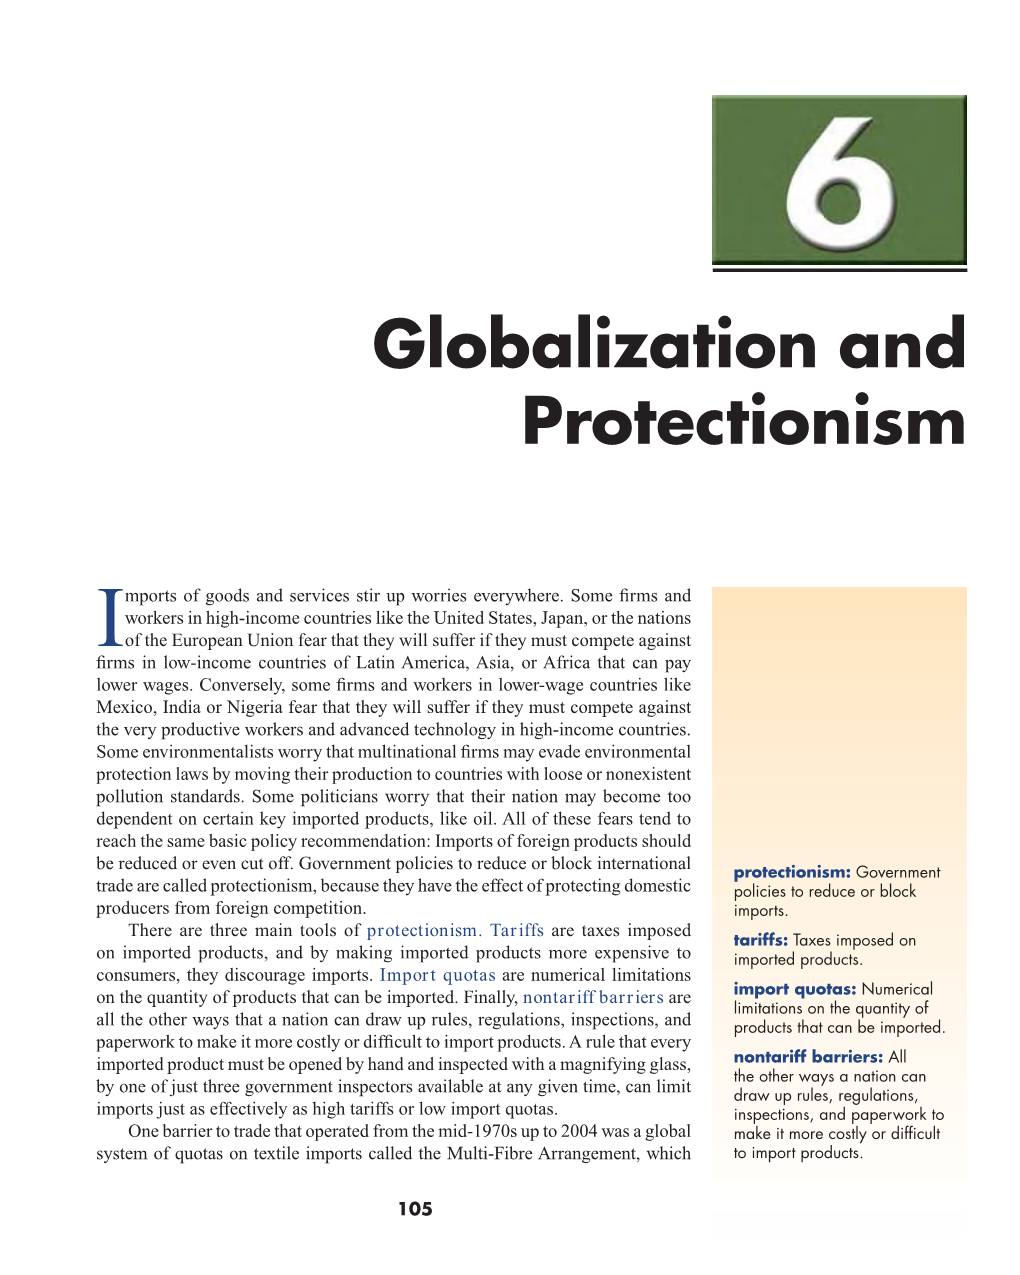 Globalization and Protectionism